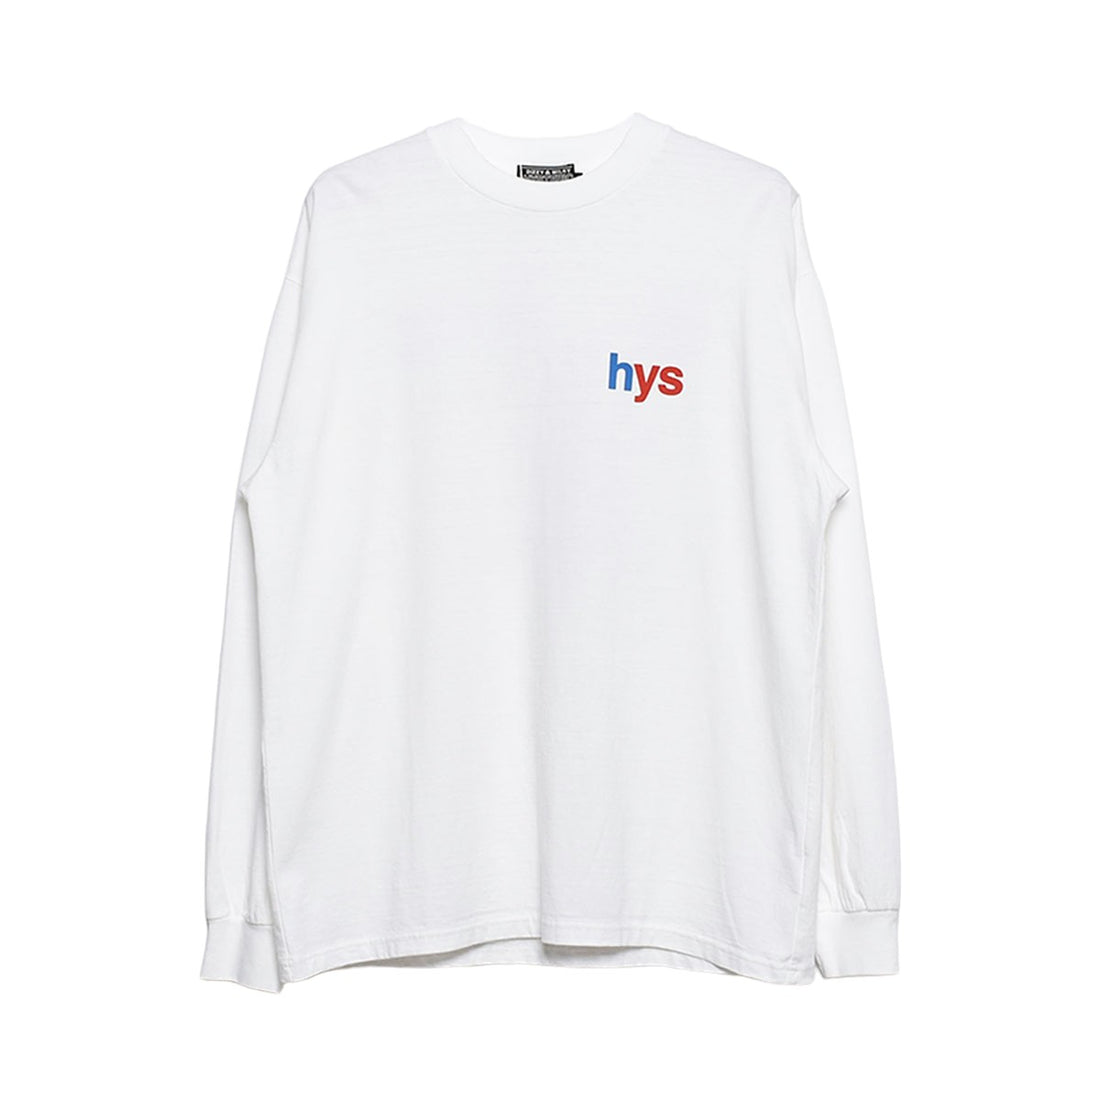 [HYSTERIC GLAMOUR]GOOD PARTY Tシャツ/WHITE(02241CL03)